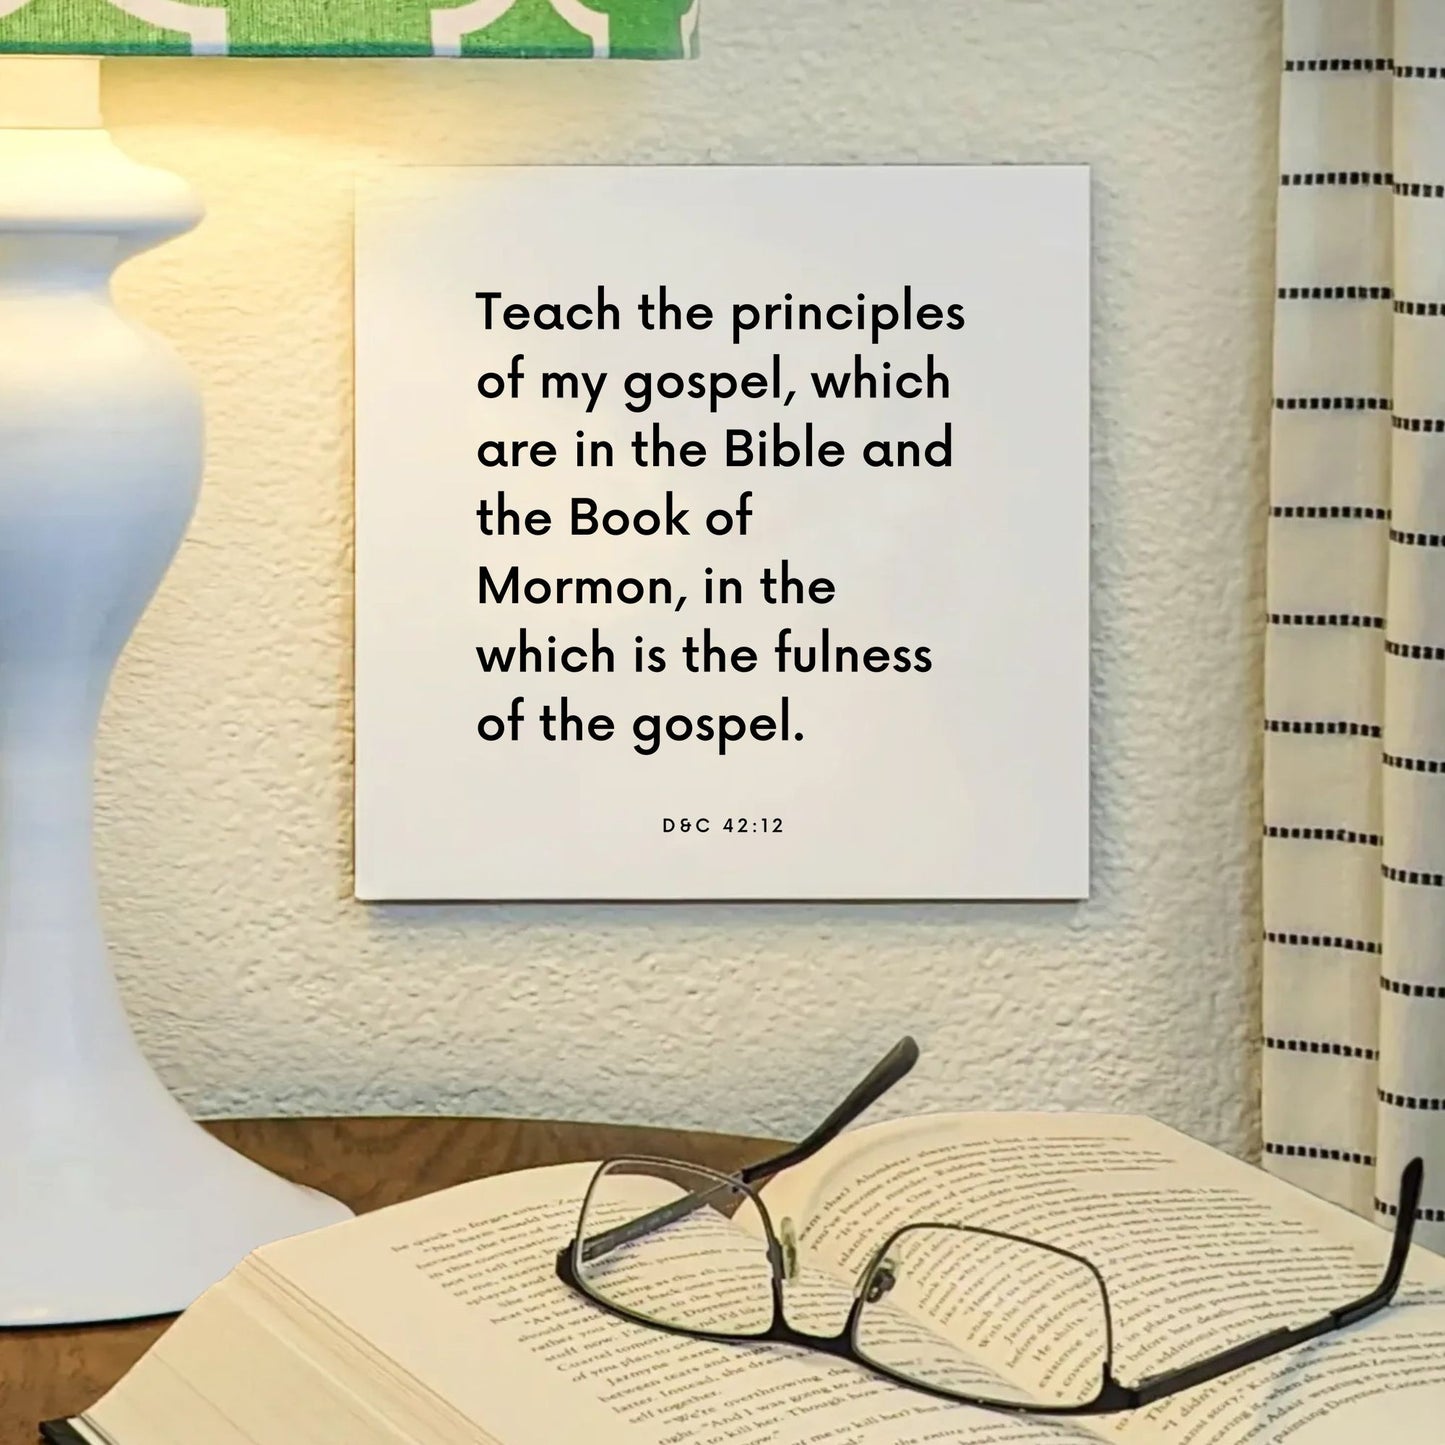 Lamp mouting of the scripture tile for D&C 42:12 - "In the which is the fulness of the gospel"